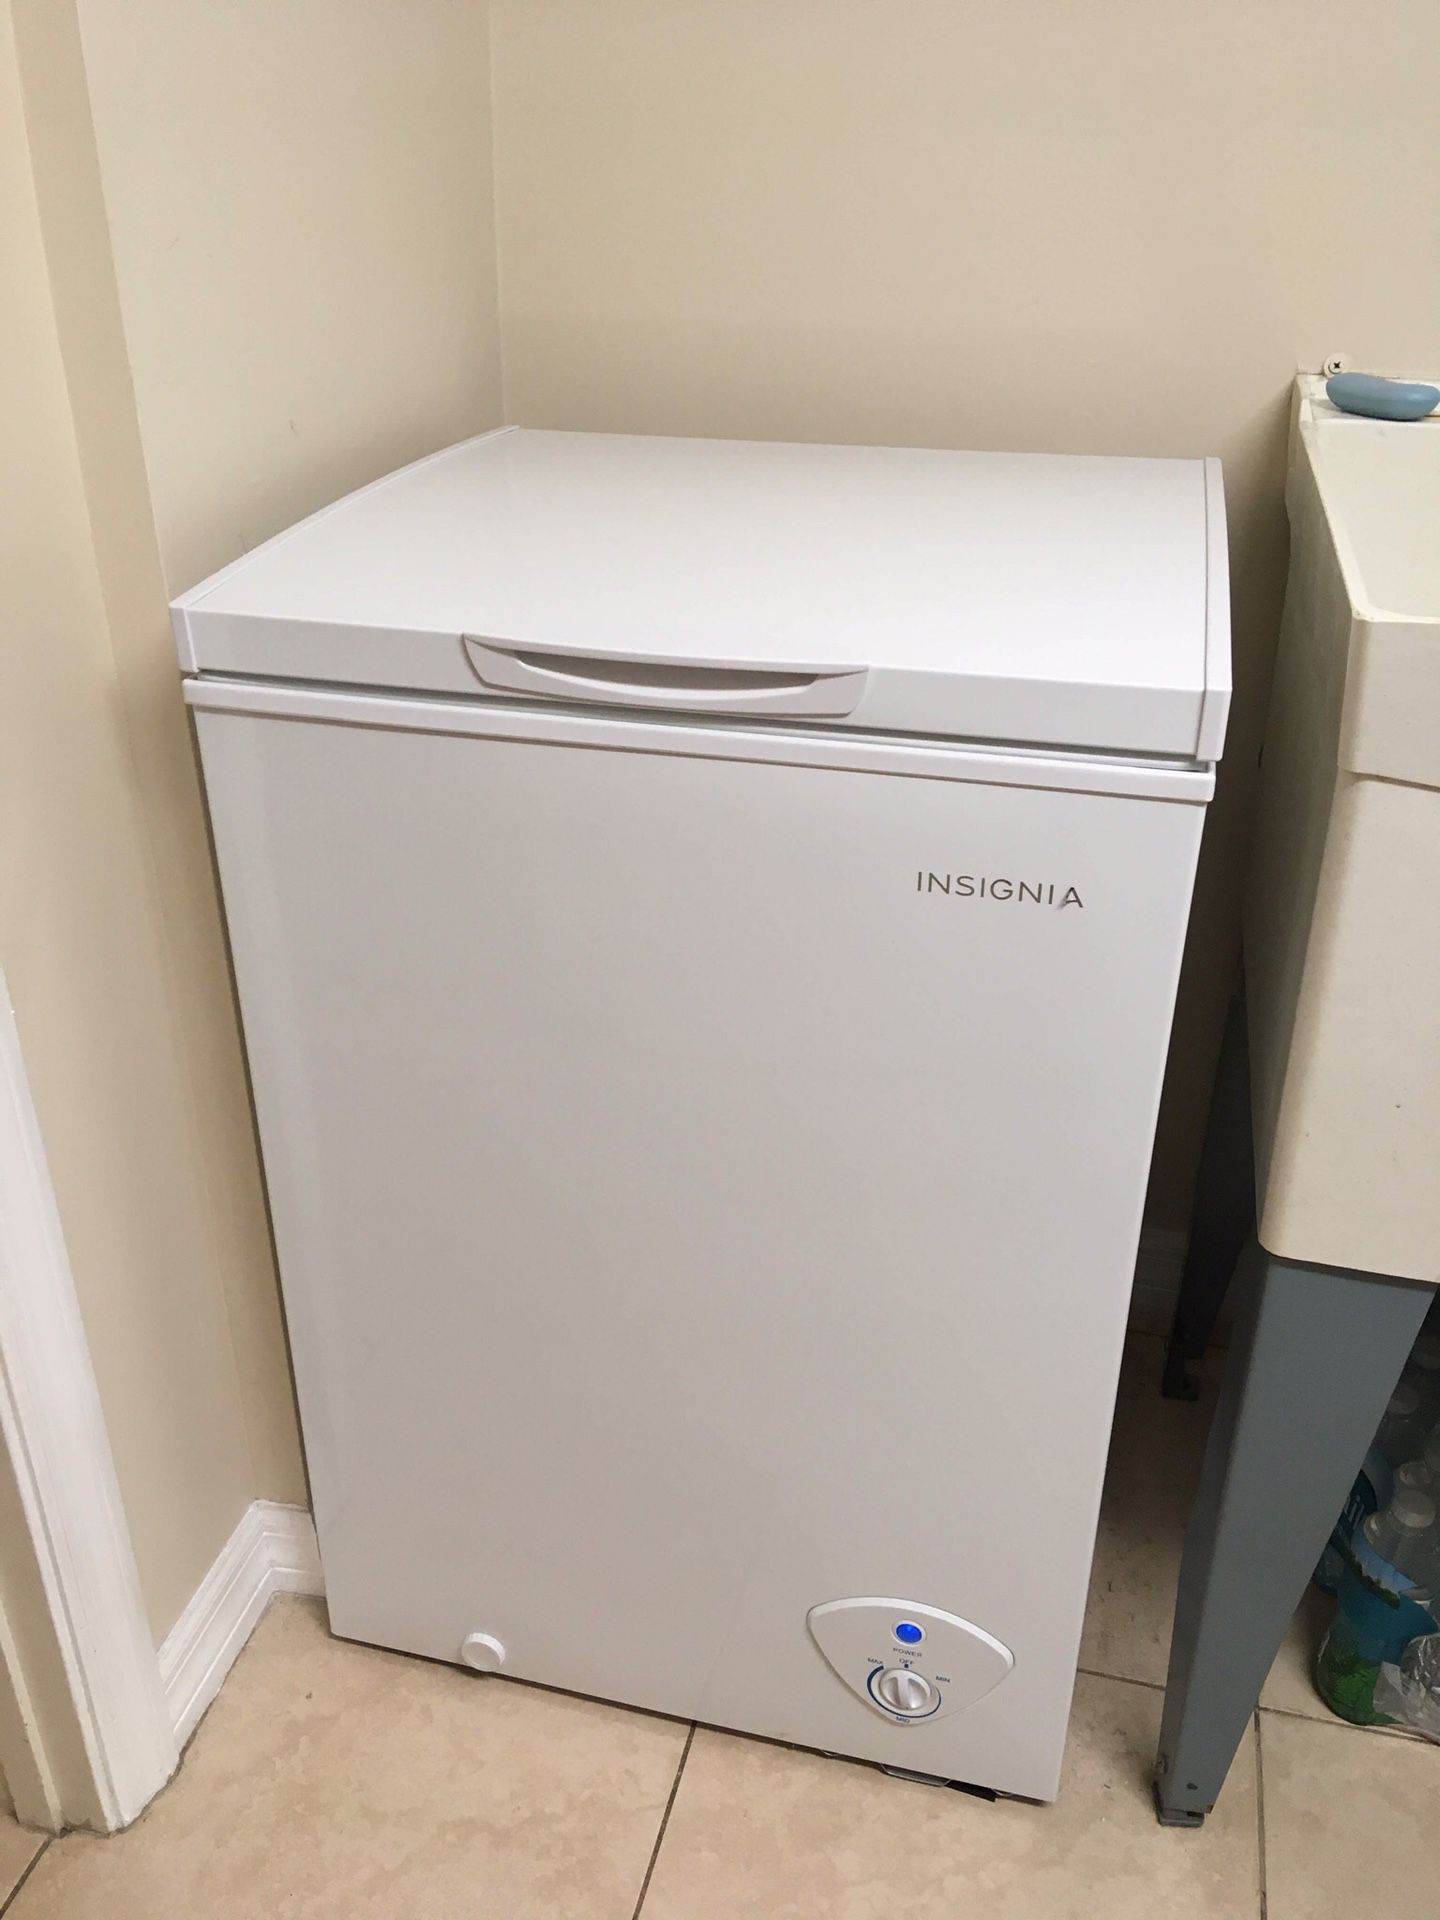 Insignia 3.5 cubic foot chest freezer. 6 months old in perfect condition.